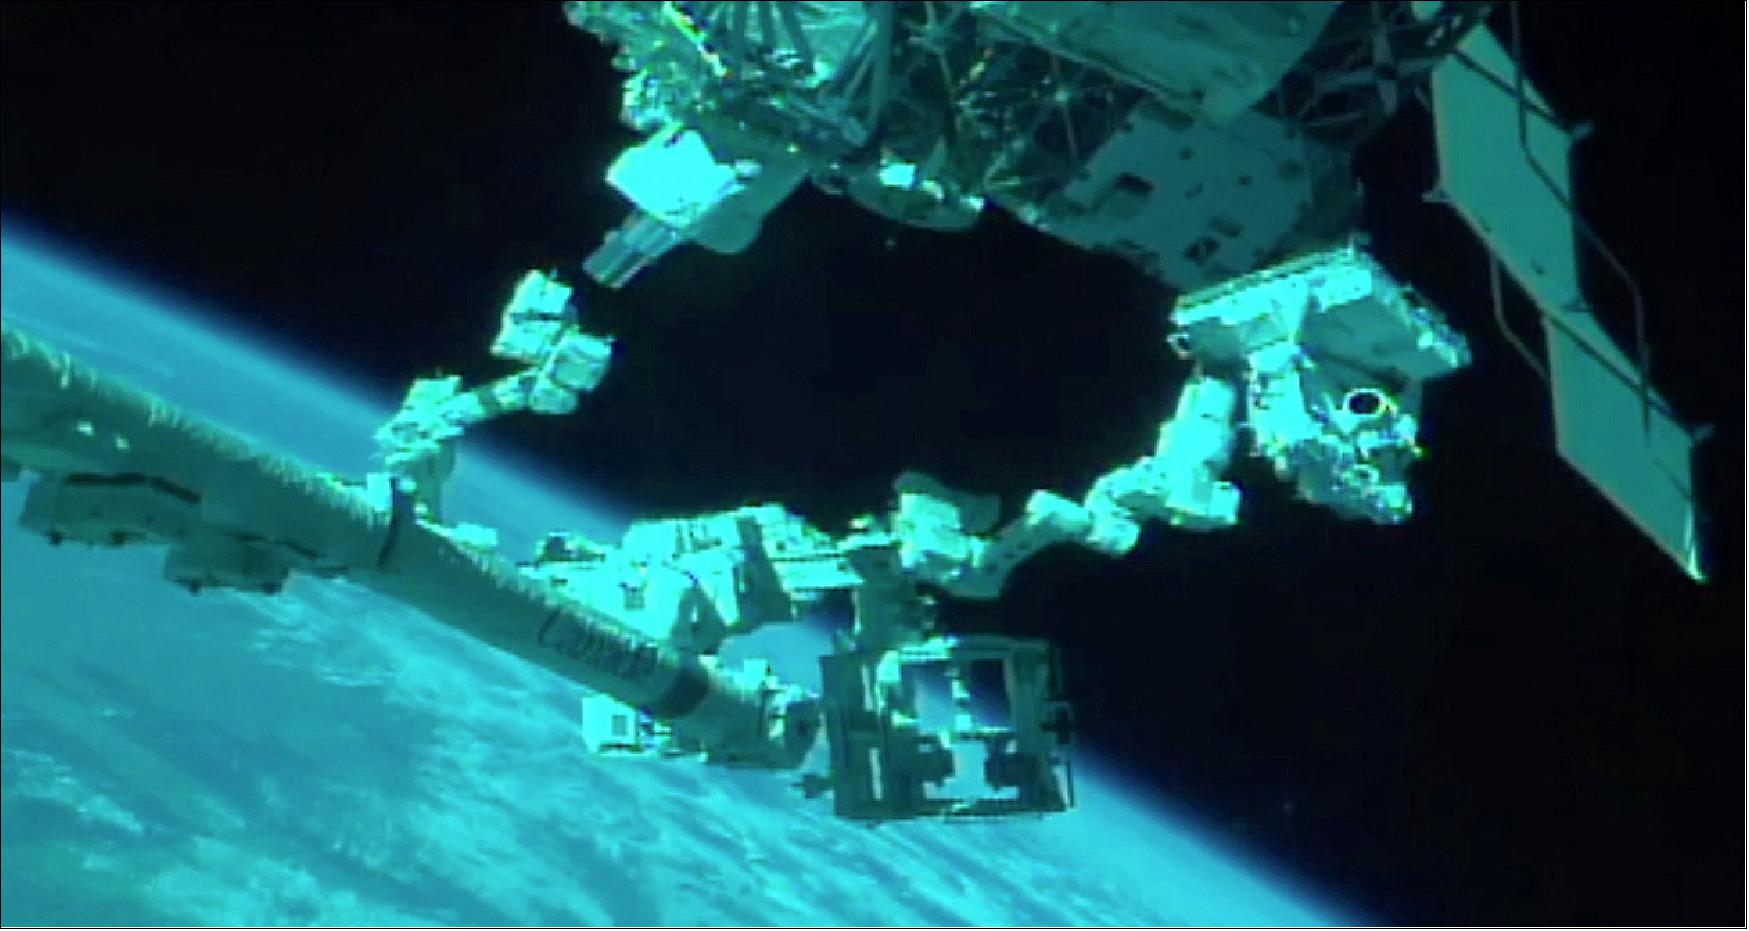 Figure 5: MUSES being installed on the External Logistics Carrier (ELC-4) by the robotic arm (image credit: TBE, NASA)